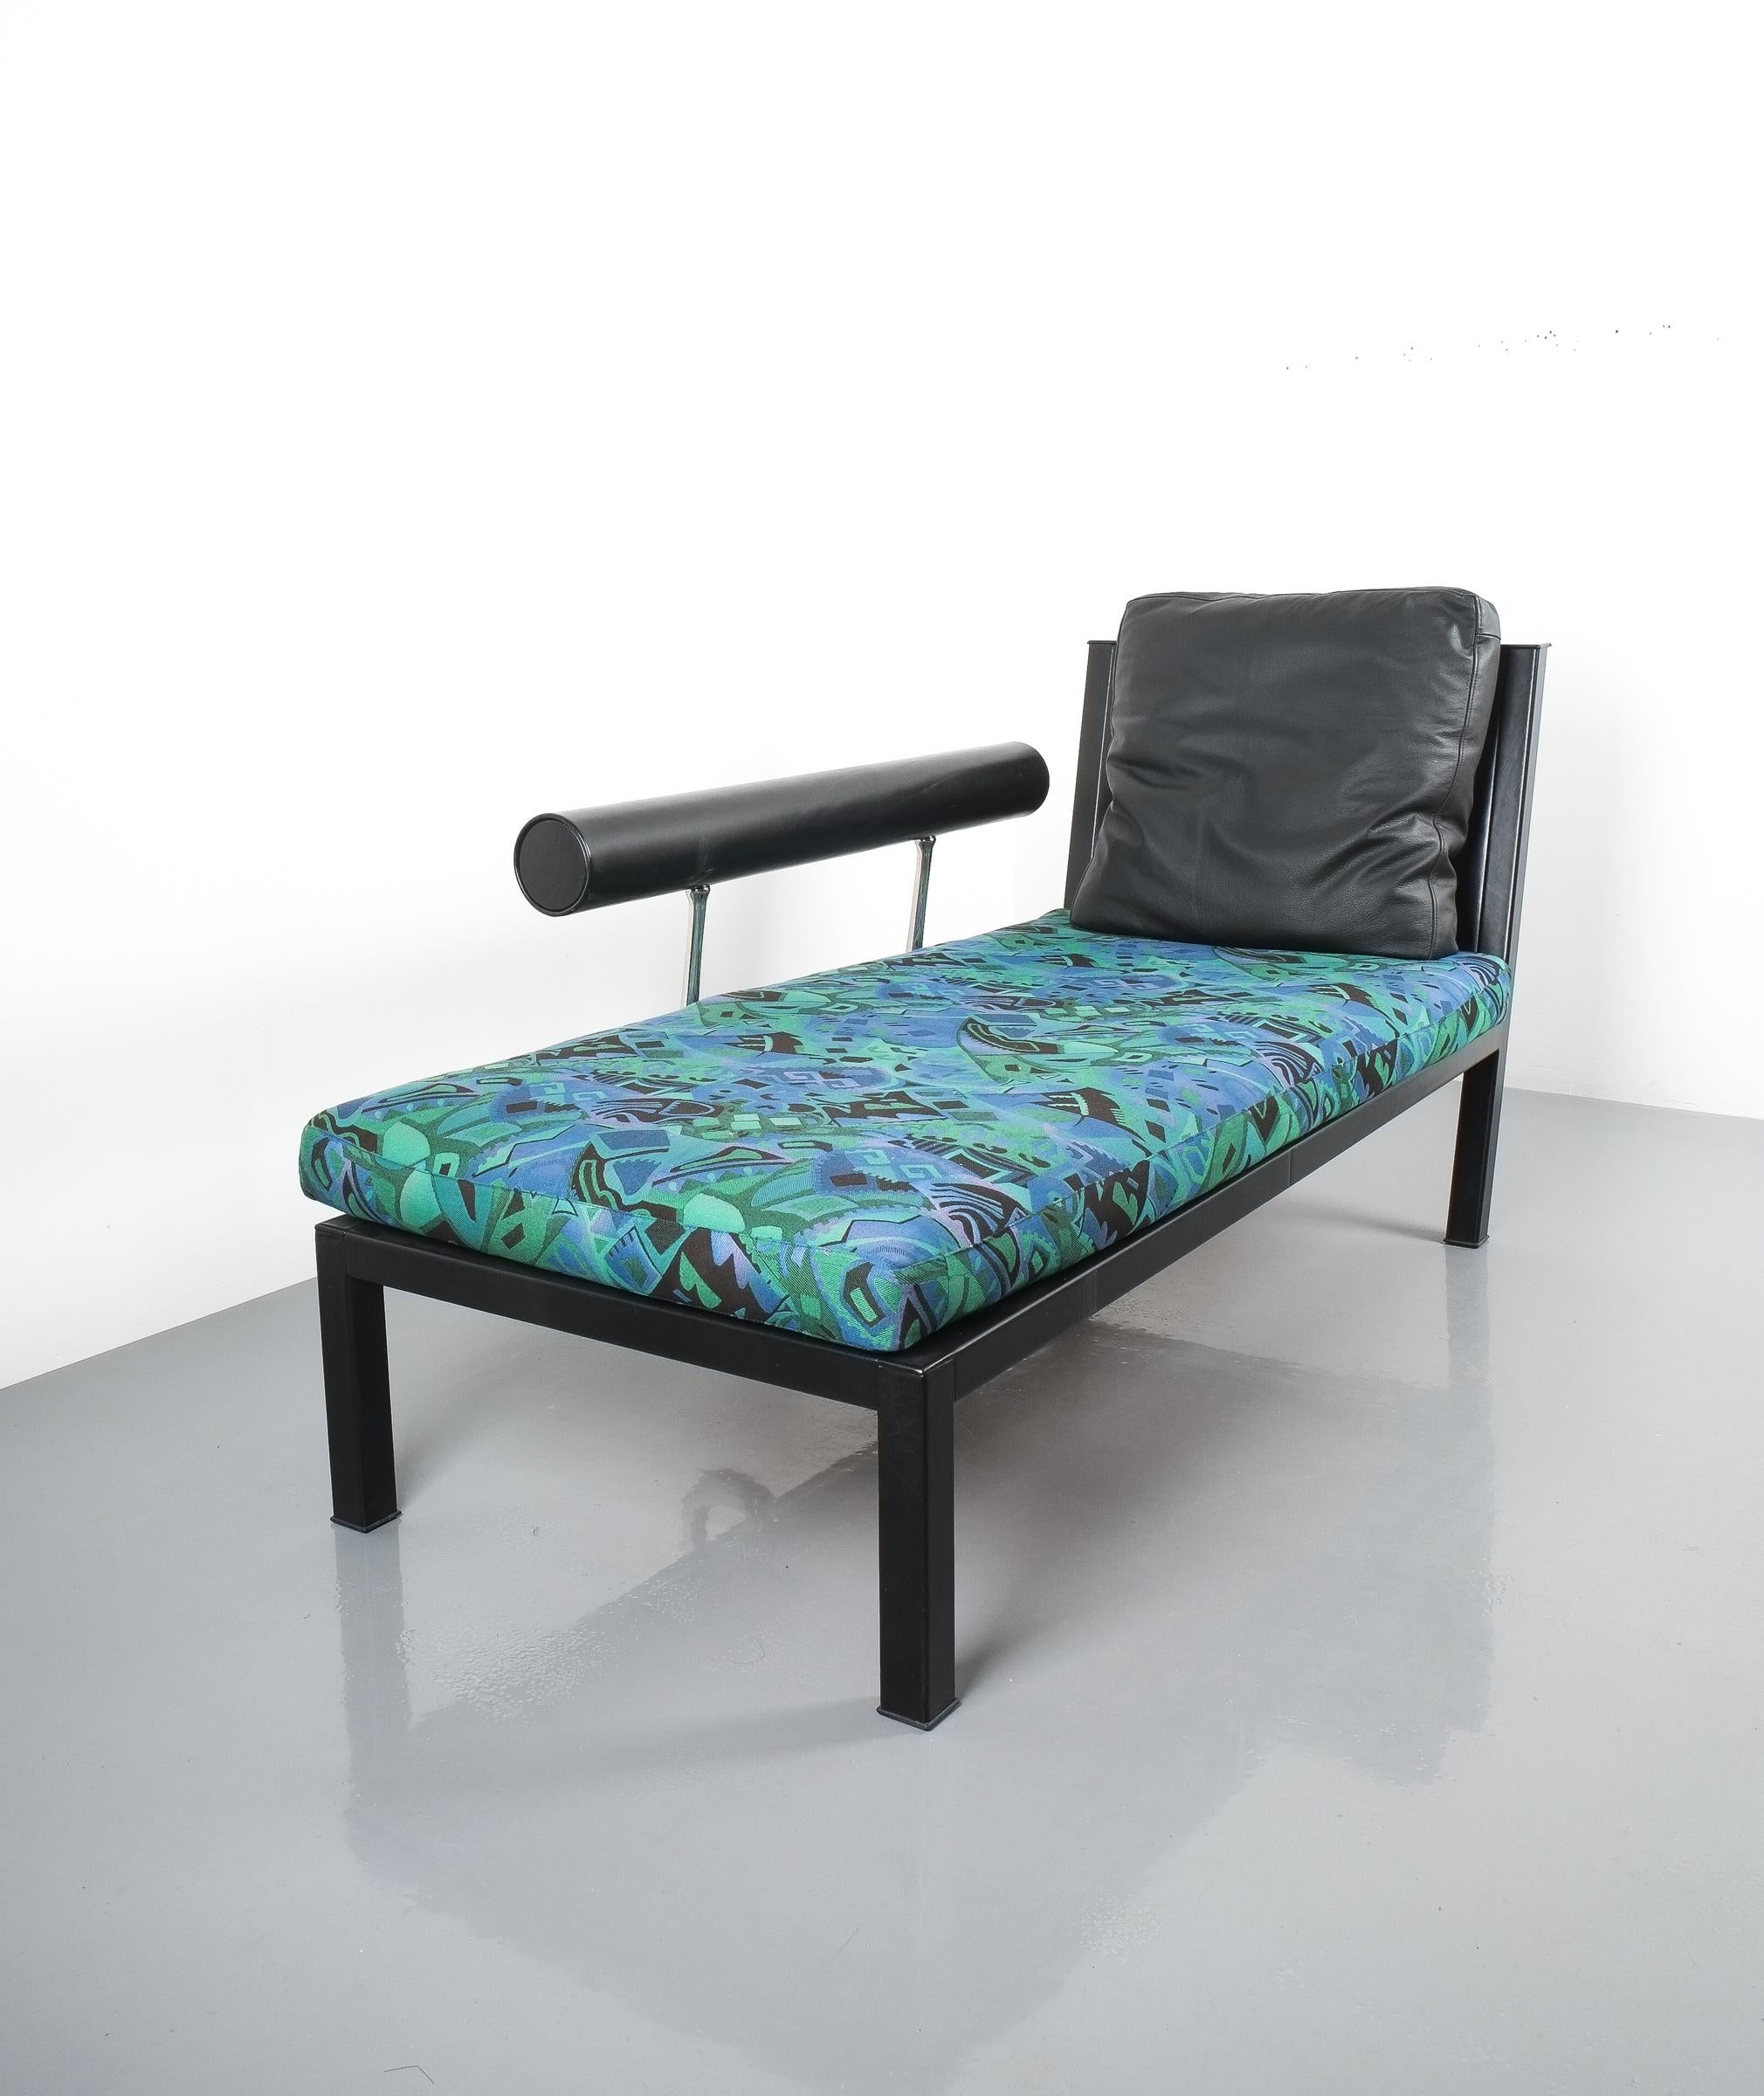 Leather chaise lounge Baisity by Antonio Citterio for B&B Italy, 1982. Elegant chaise longue featuring a leather upholstered steel-frame and backrest, a black leather cushion and a multicolored pattern cushion from the 1980s. Stunning polished